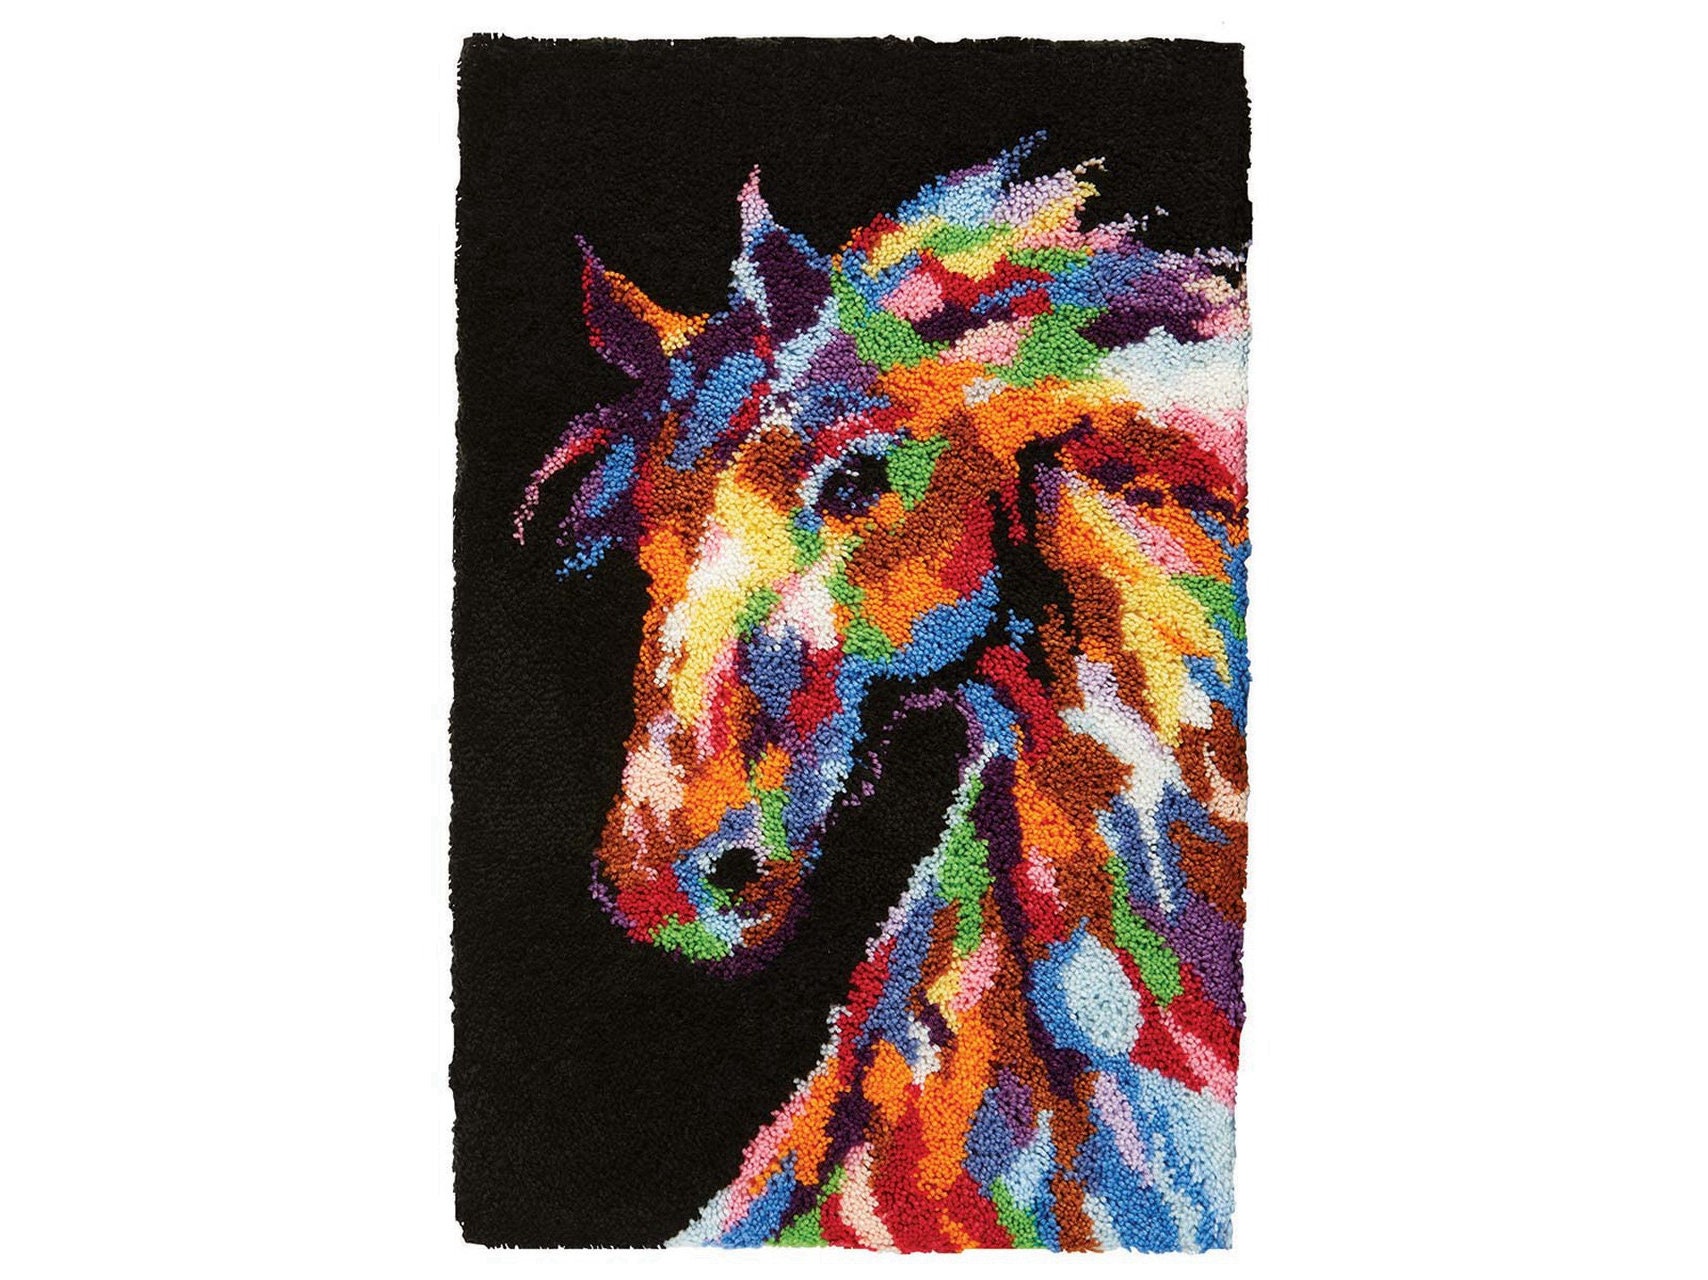 cRAFTILOO DIY Rug 3D Unicorn Pouch Latch Hook Kits for Kids Sewing